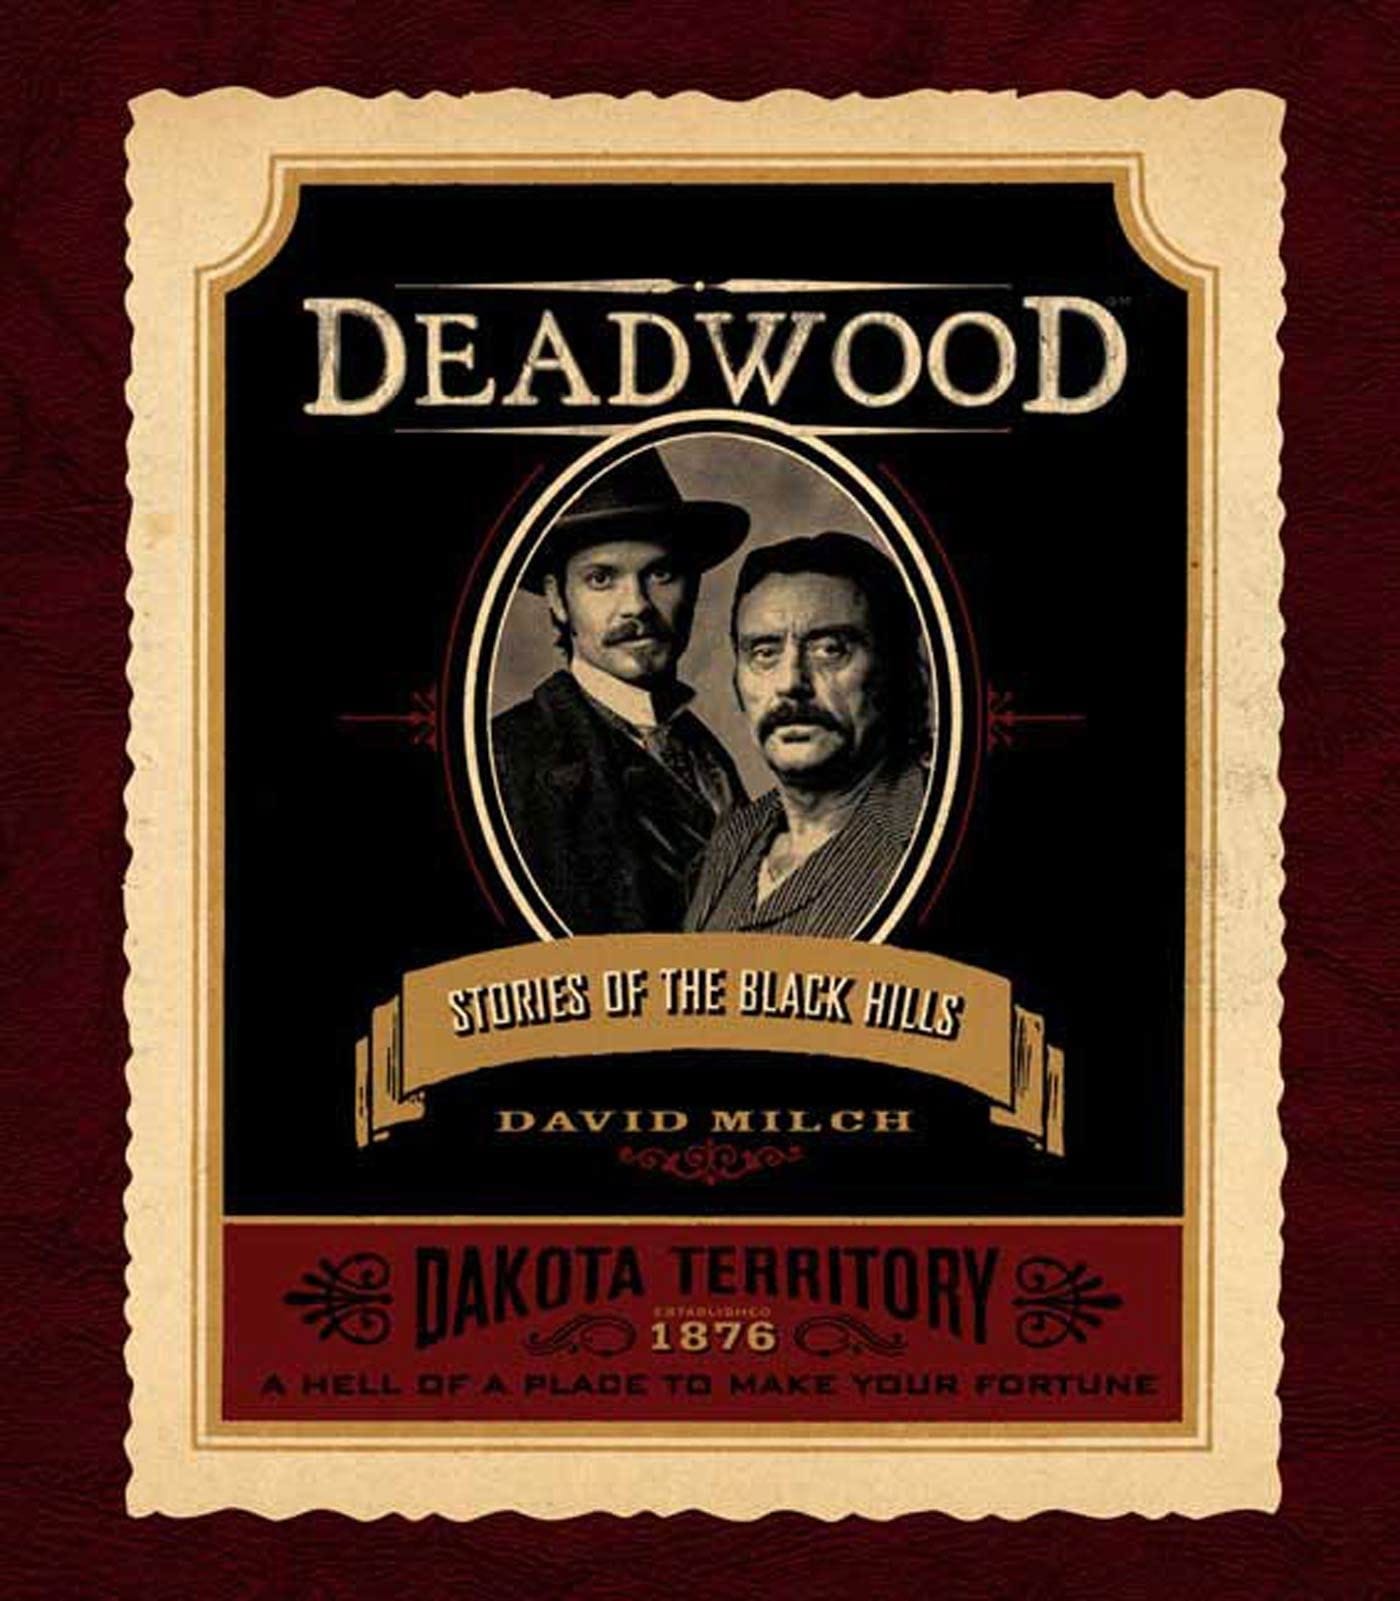 This image shows the cover of David Milch's 2006 book Deadwood: Stories of the Black Hills (published by Melcher Media).